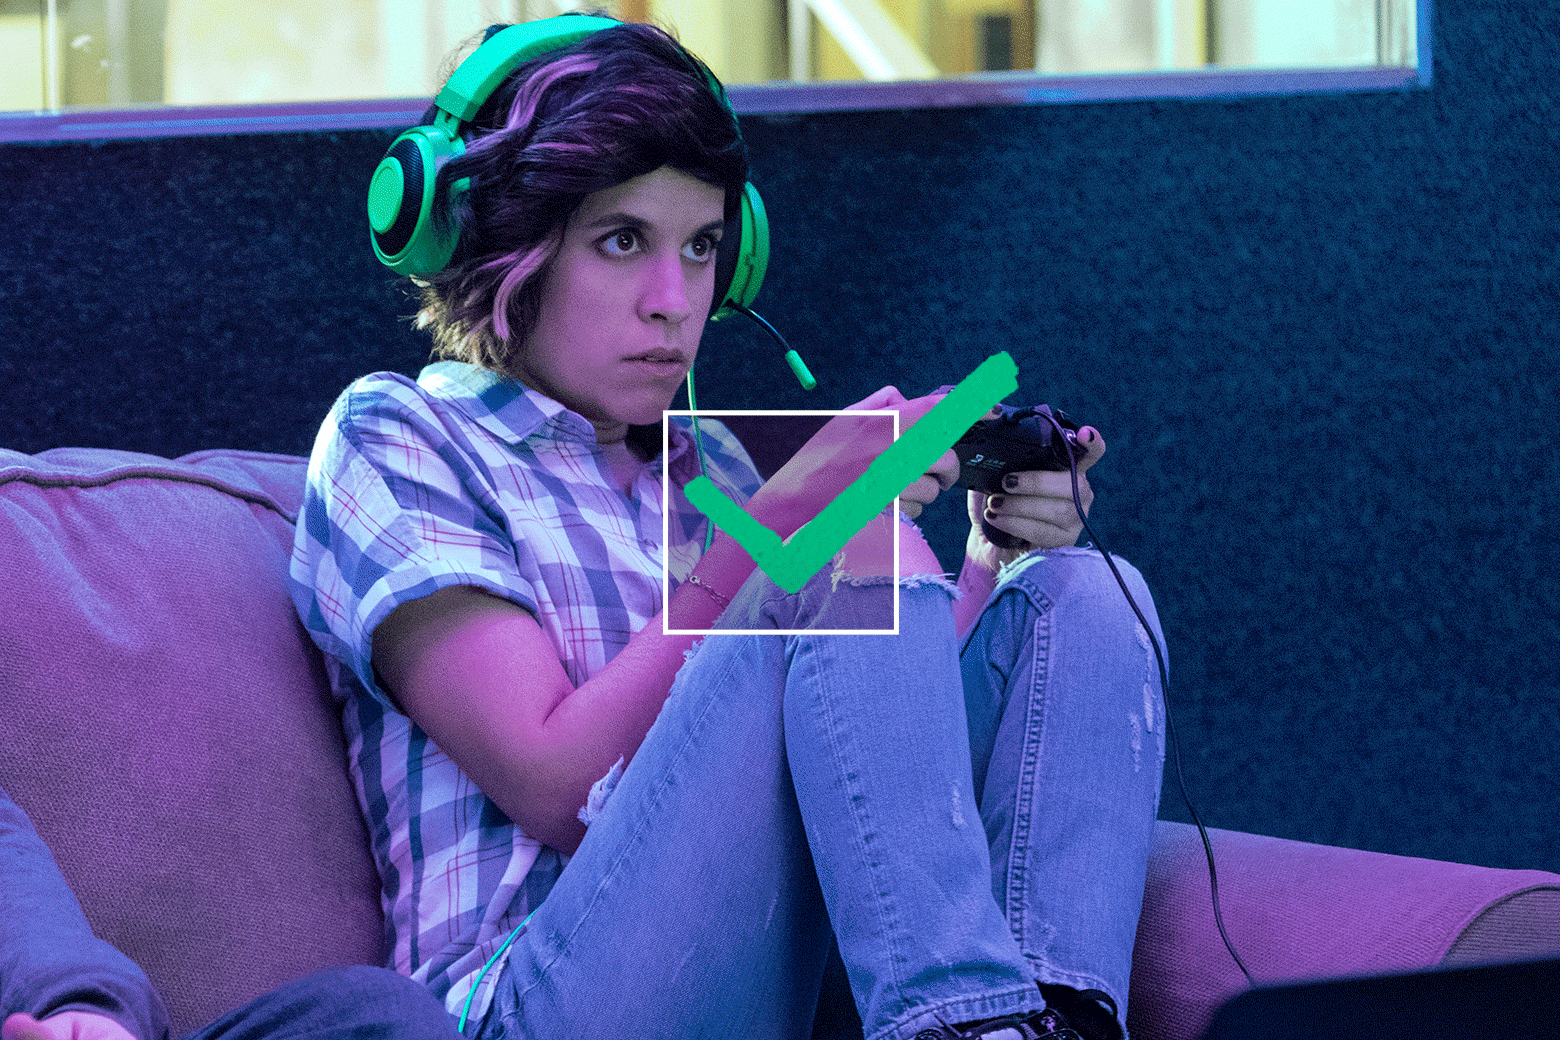 A woman sits on a couch playing a video game. There is a green checkmark animation over the photo.